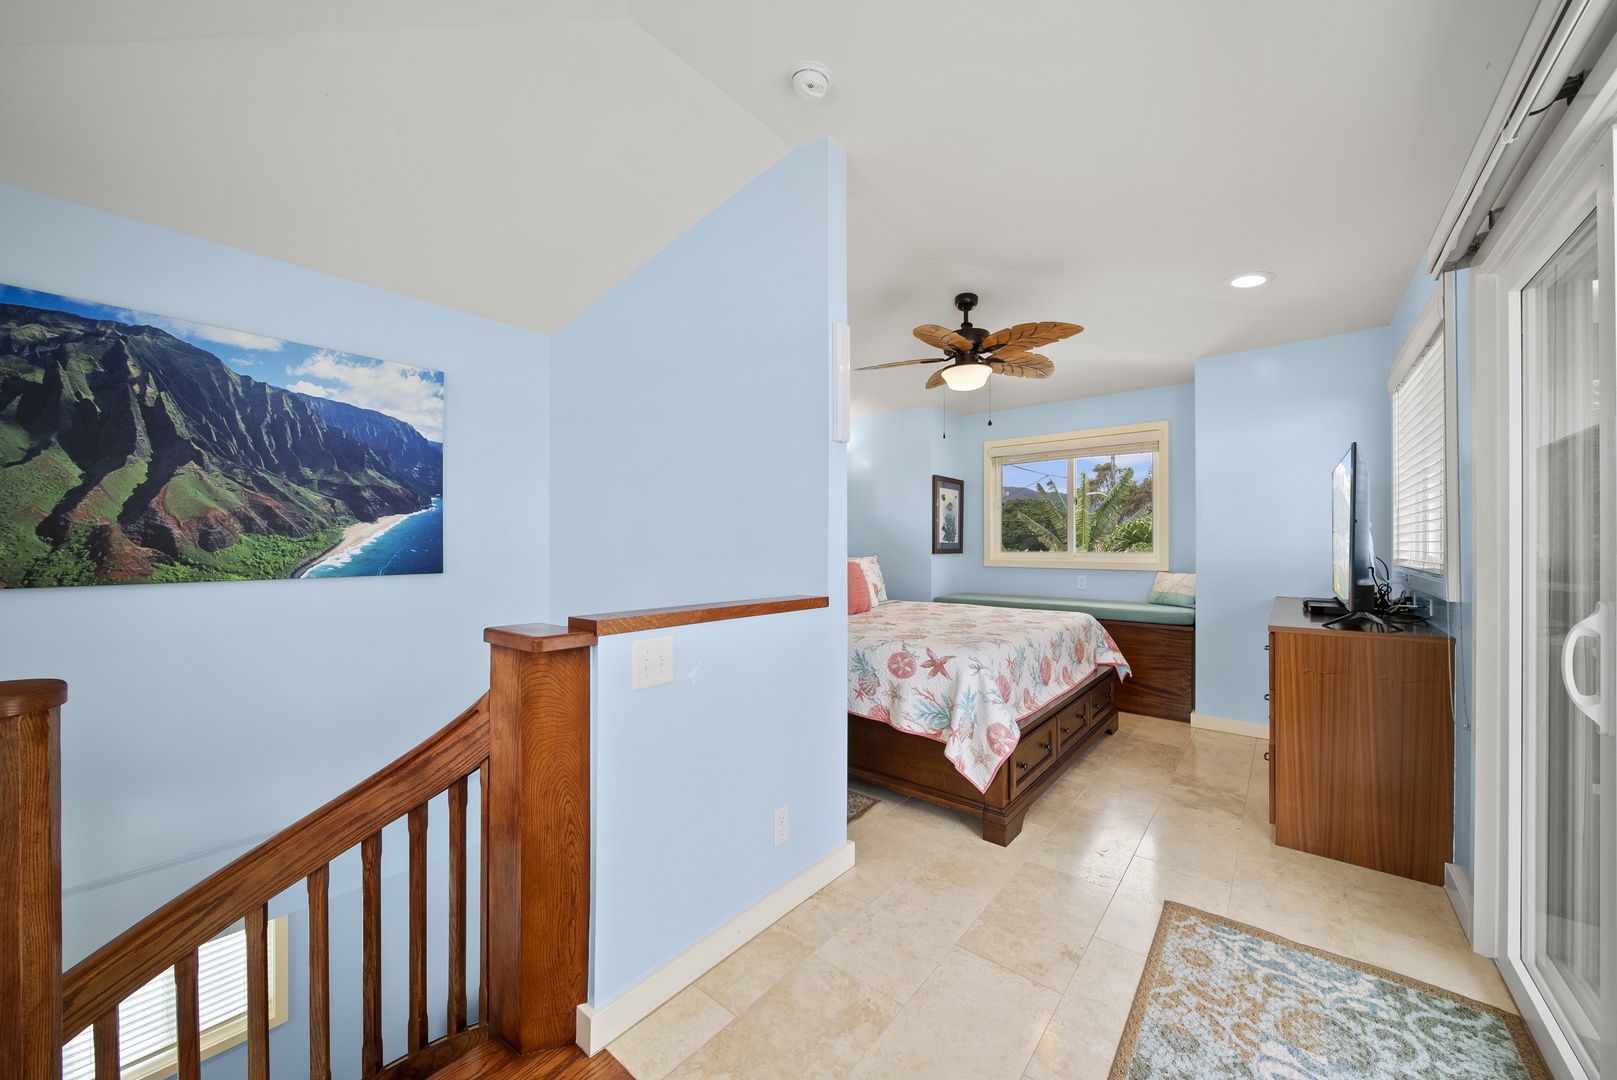 Waialua Vacation Rentals, Waialua Beachside Cottage - Going up the custom spiral staircase you come to the main bedroom loft